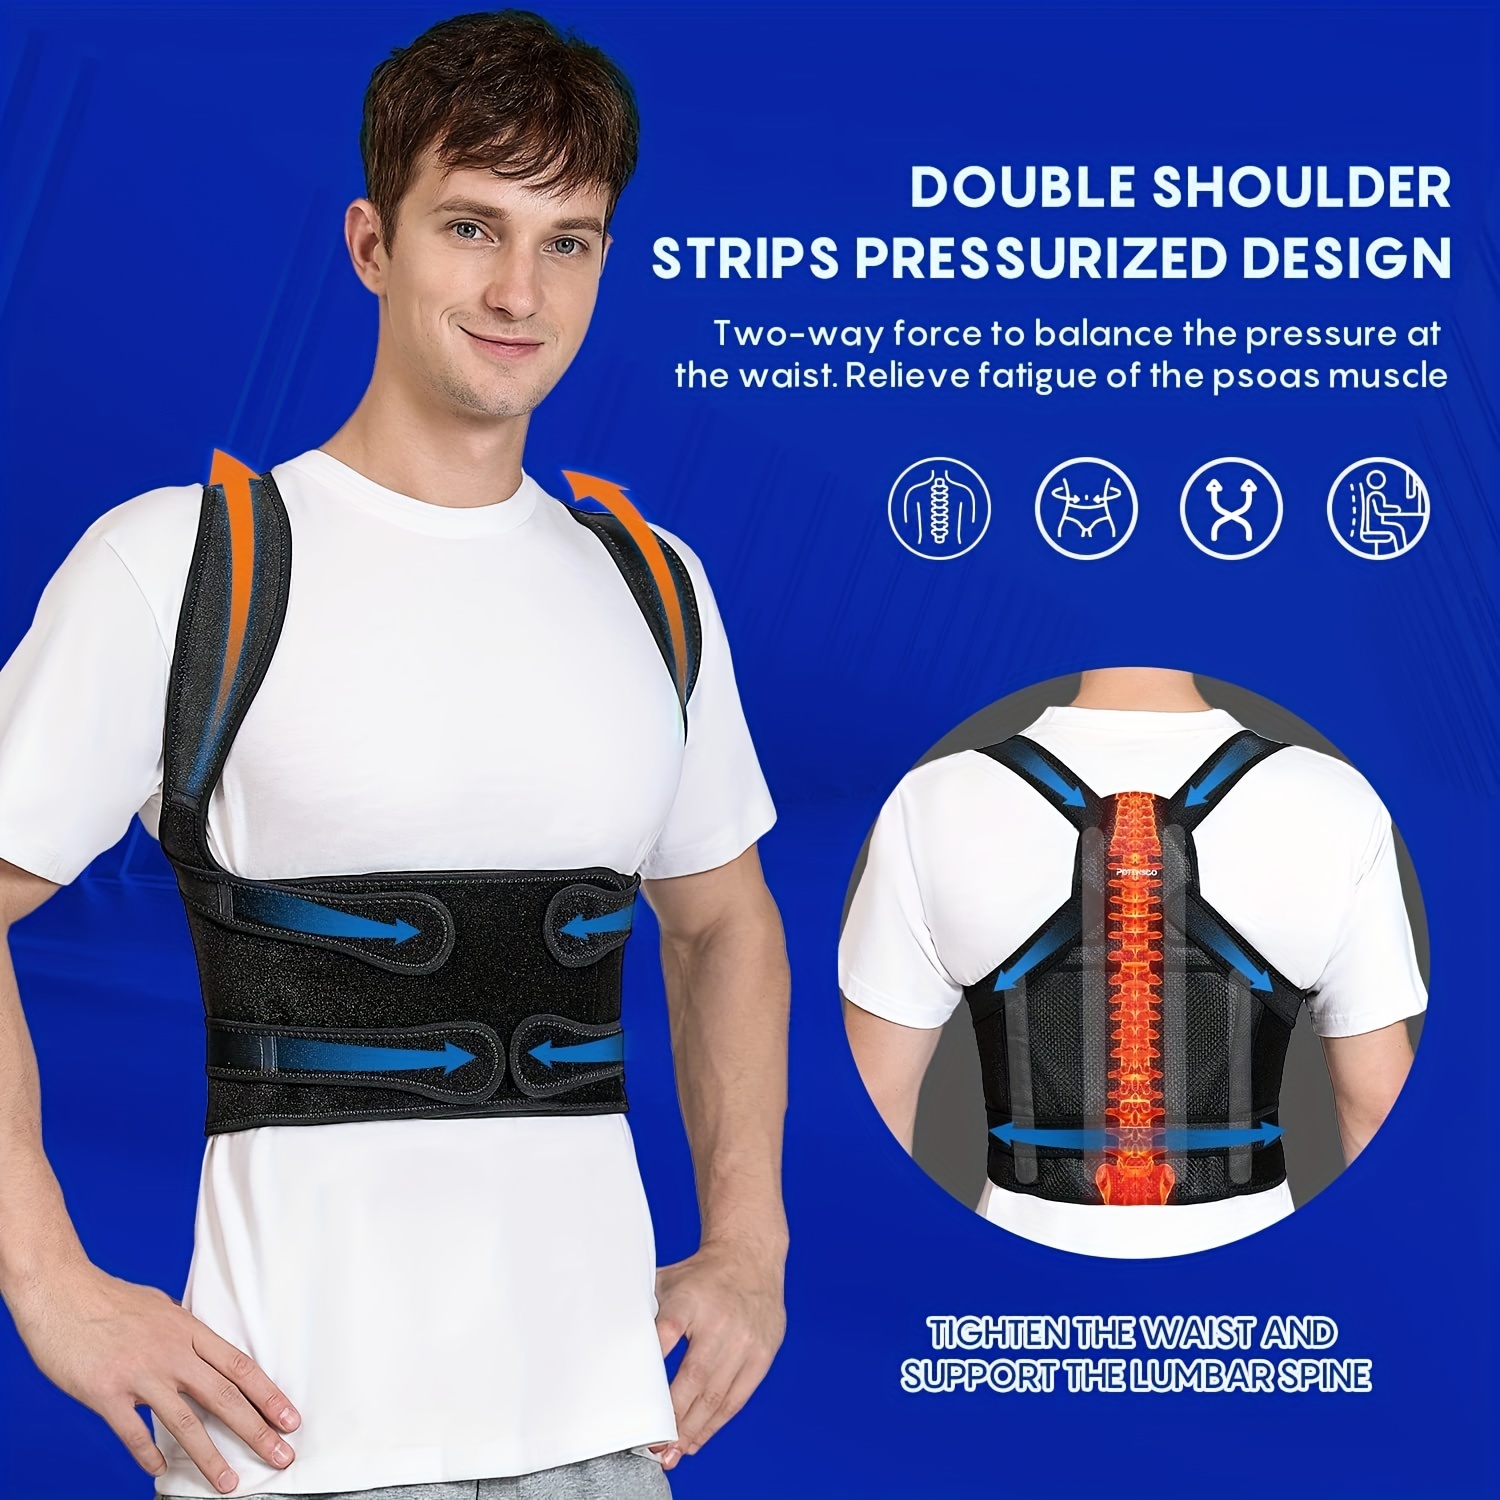 Back Brace and Posture Corrector for Women and Men – My Store